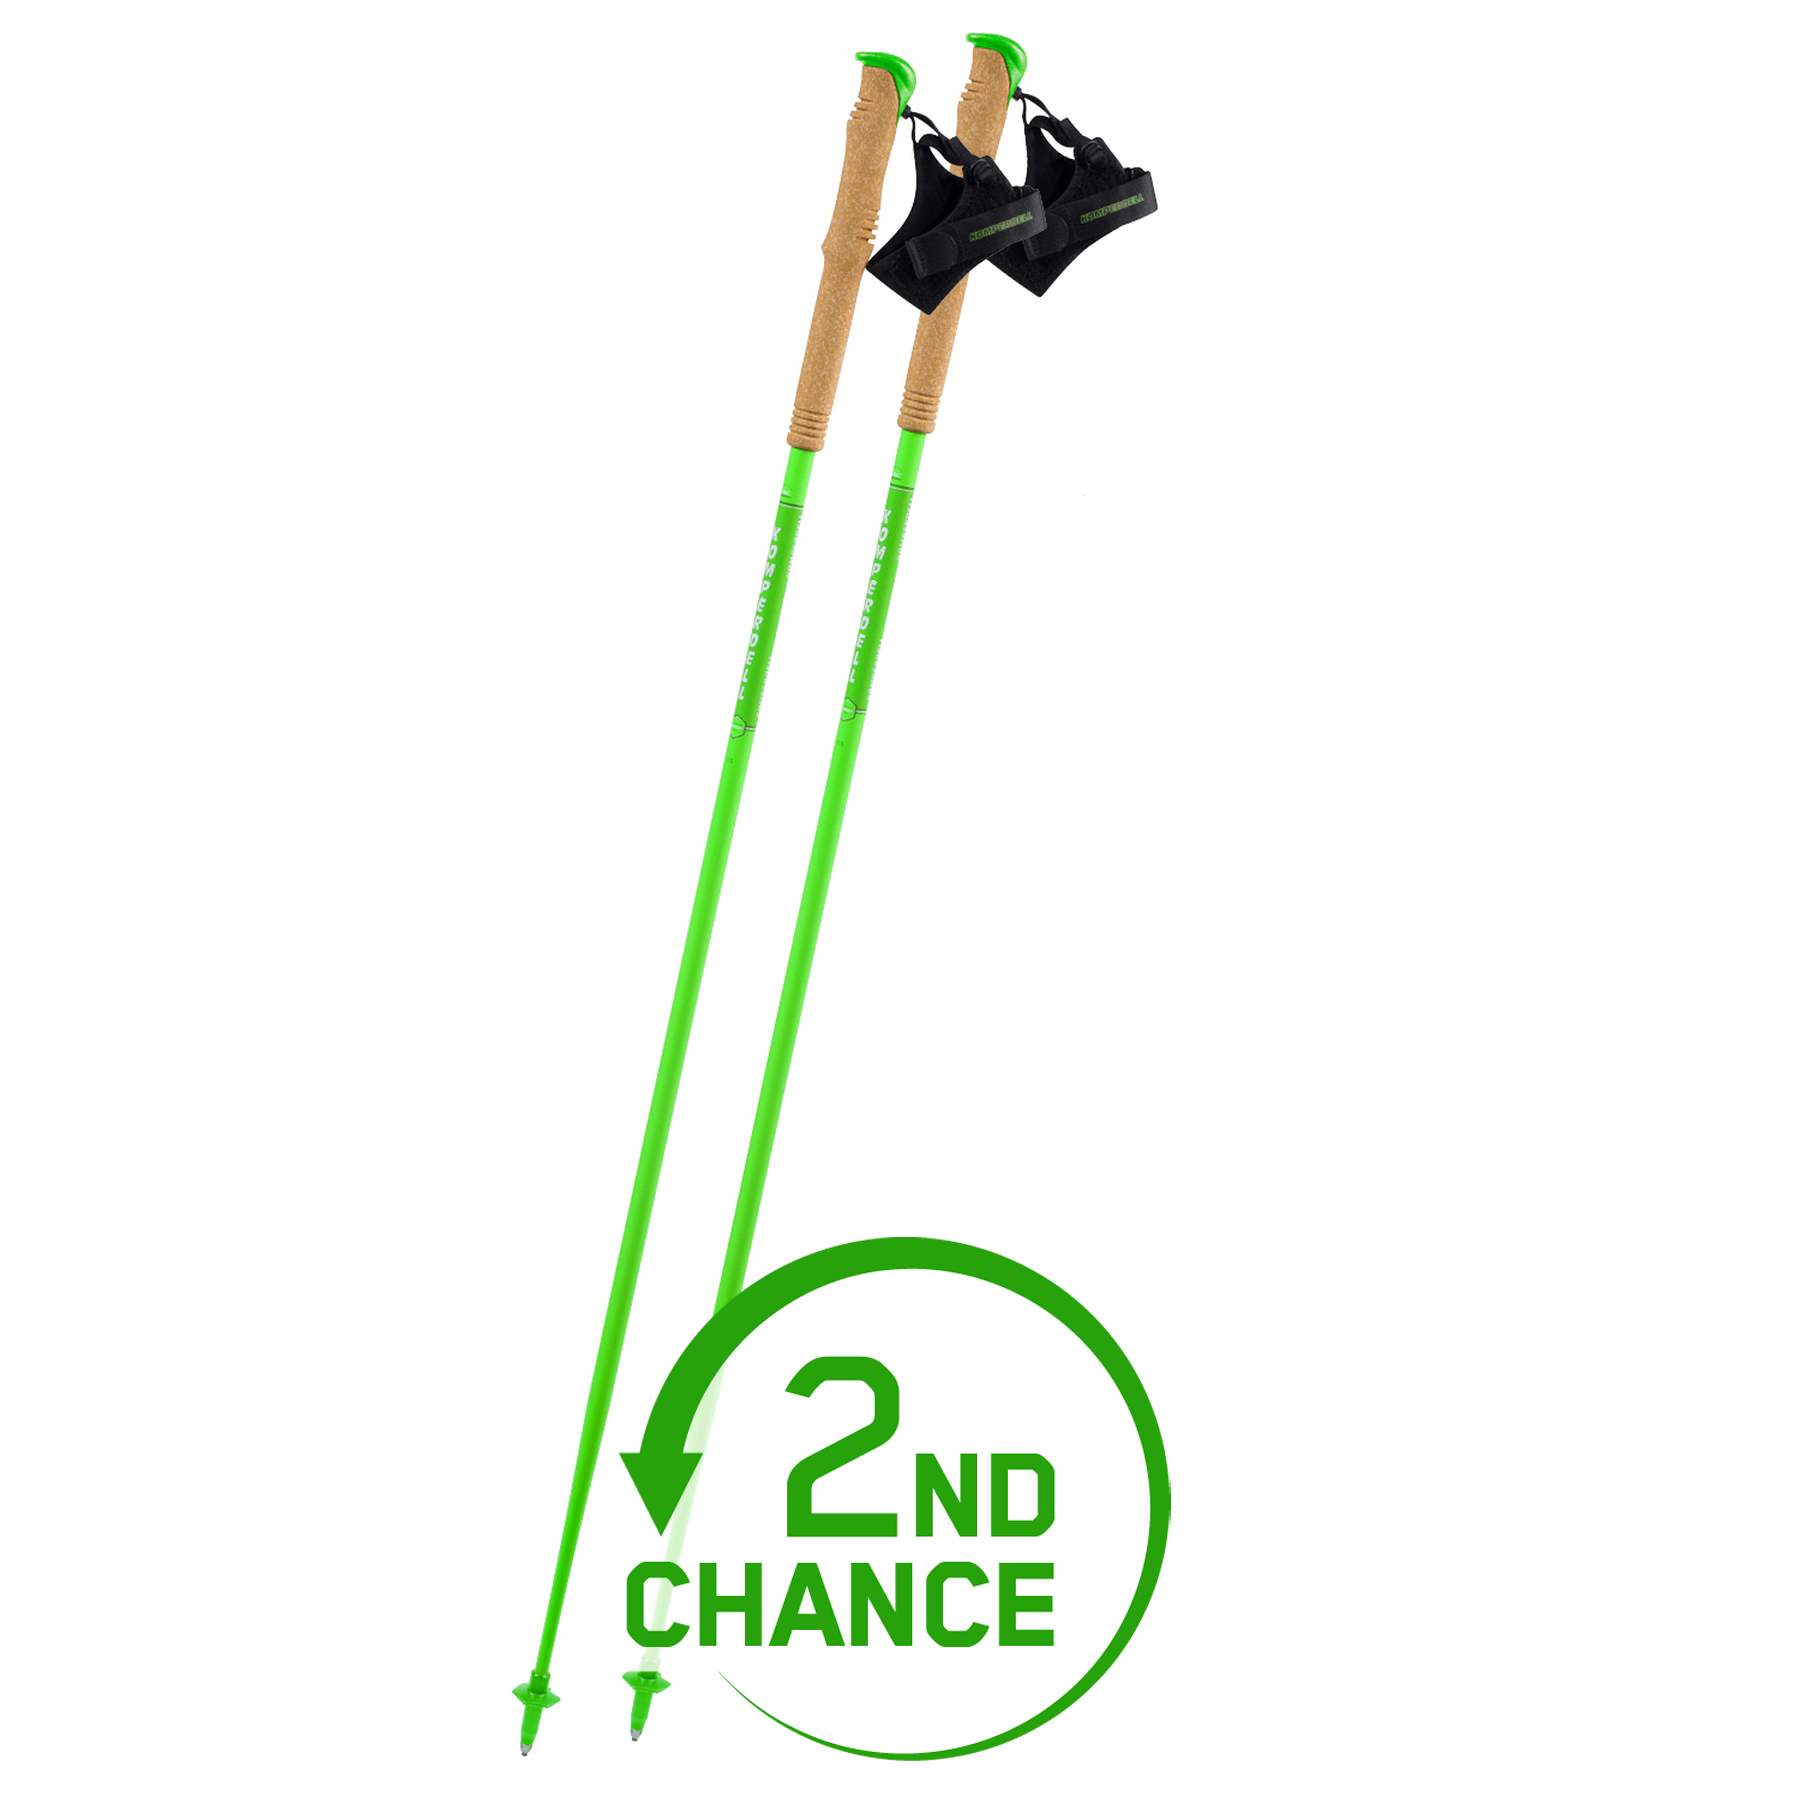 Picture of Komperdell Carbon C1 Team Green Trailrunning Poles (Pair) - green - 2nd Choice